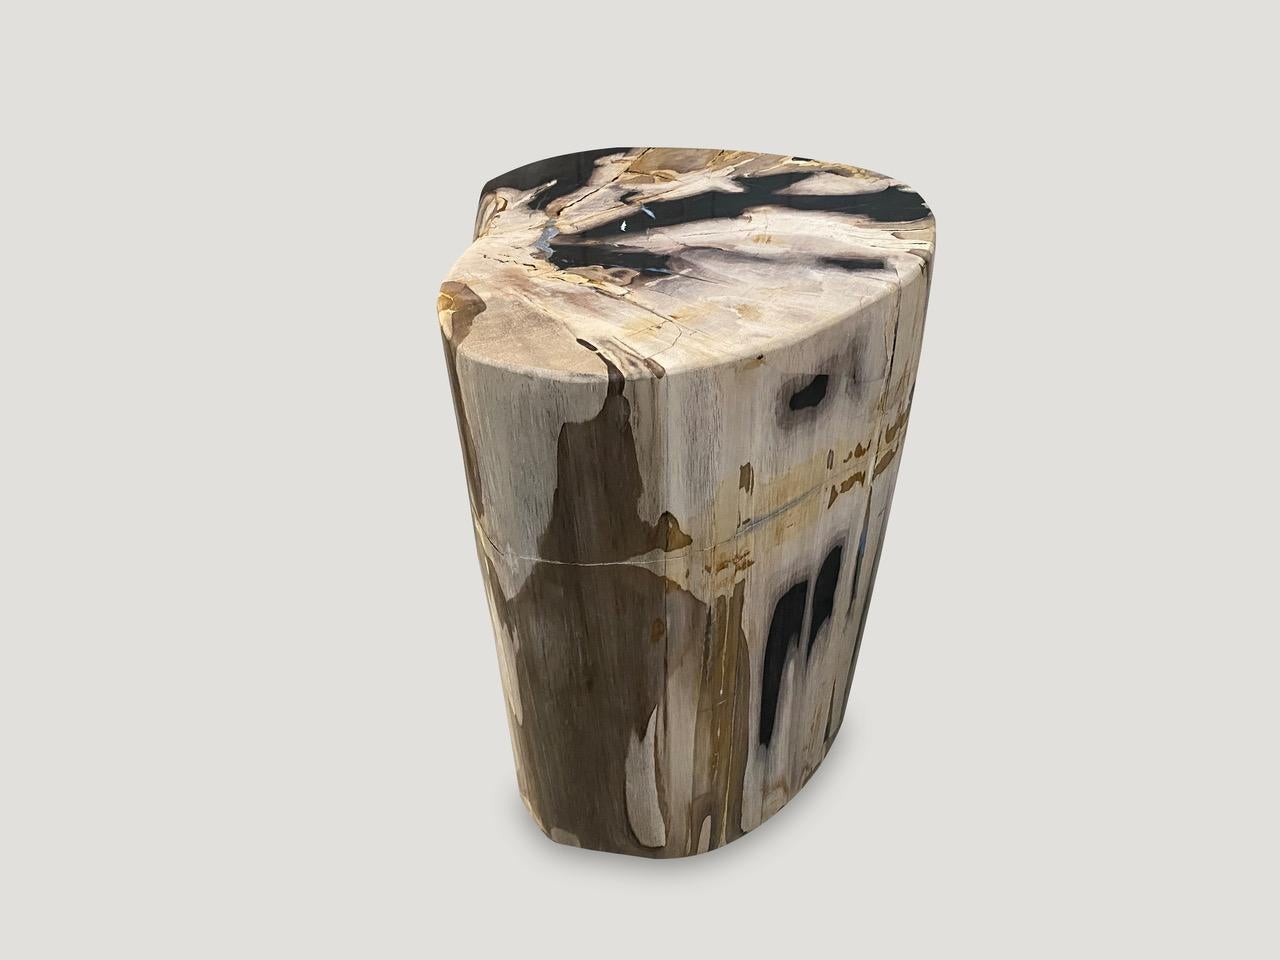 High quality petrified wood side table. It’s fascinating how Mother Nature produces these exquisite 40 million year old petrified teak logs with such contrasting colors and natural patterns throughout. Modern yet with so much history. 

As with a